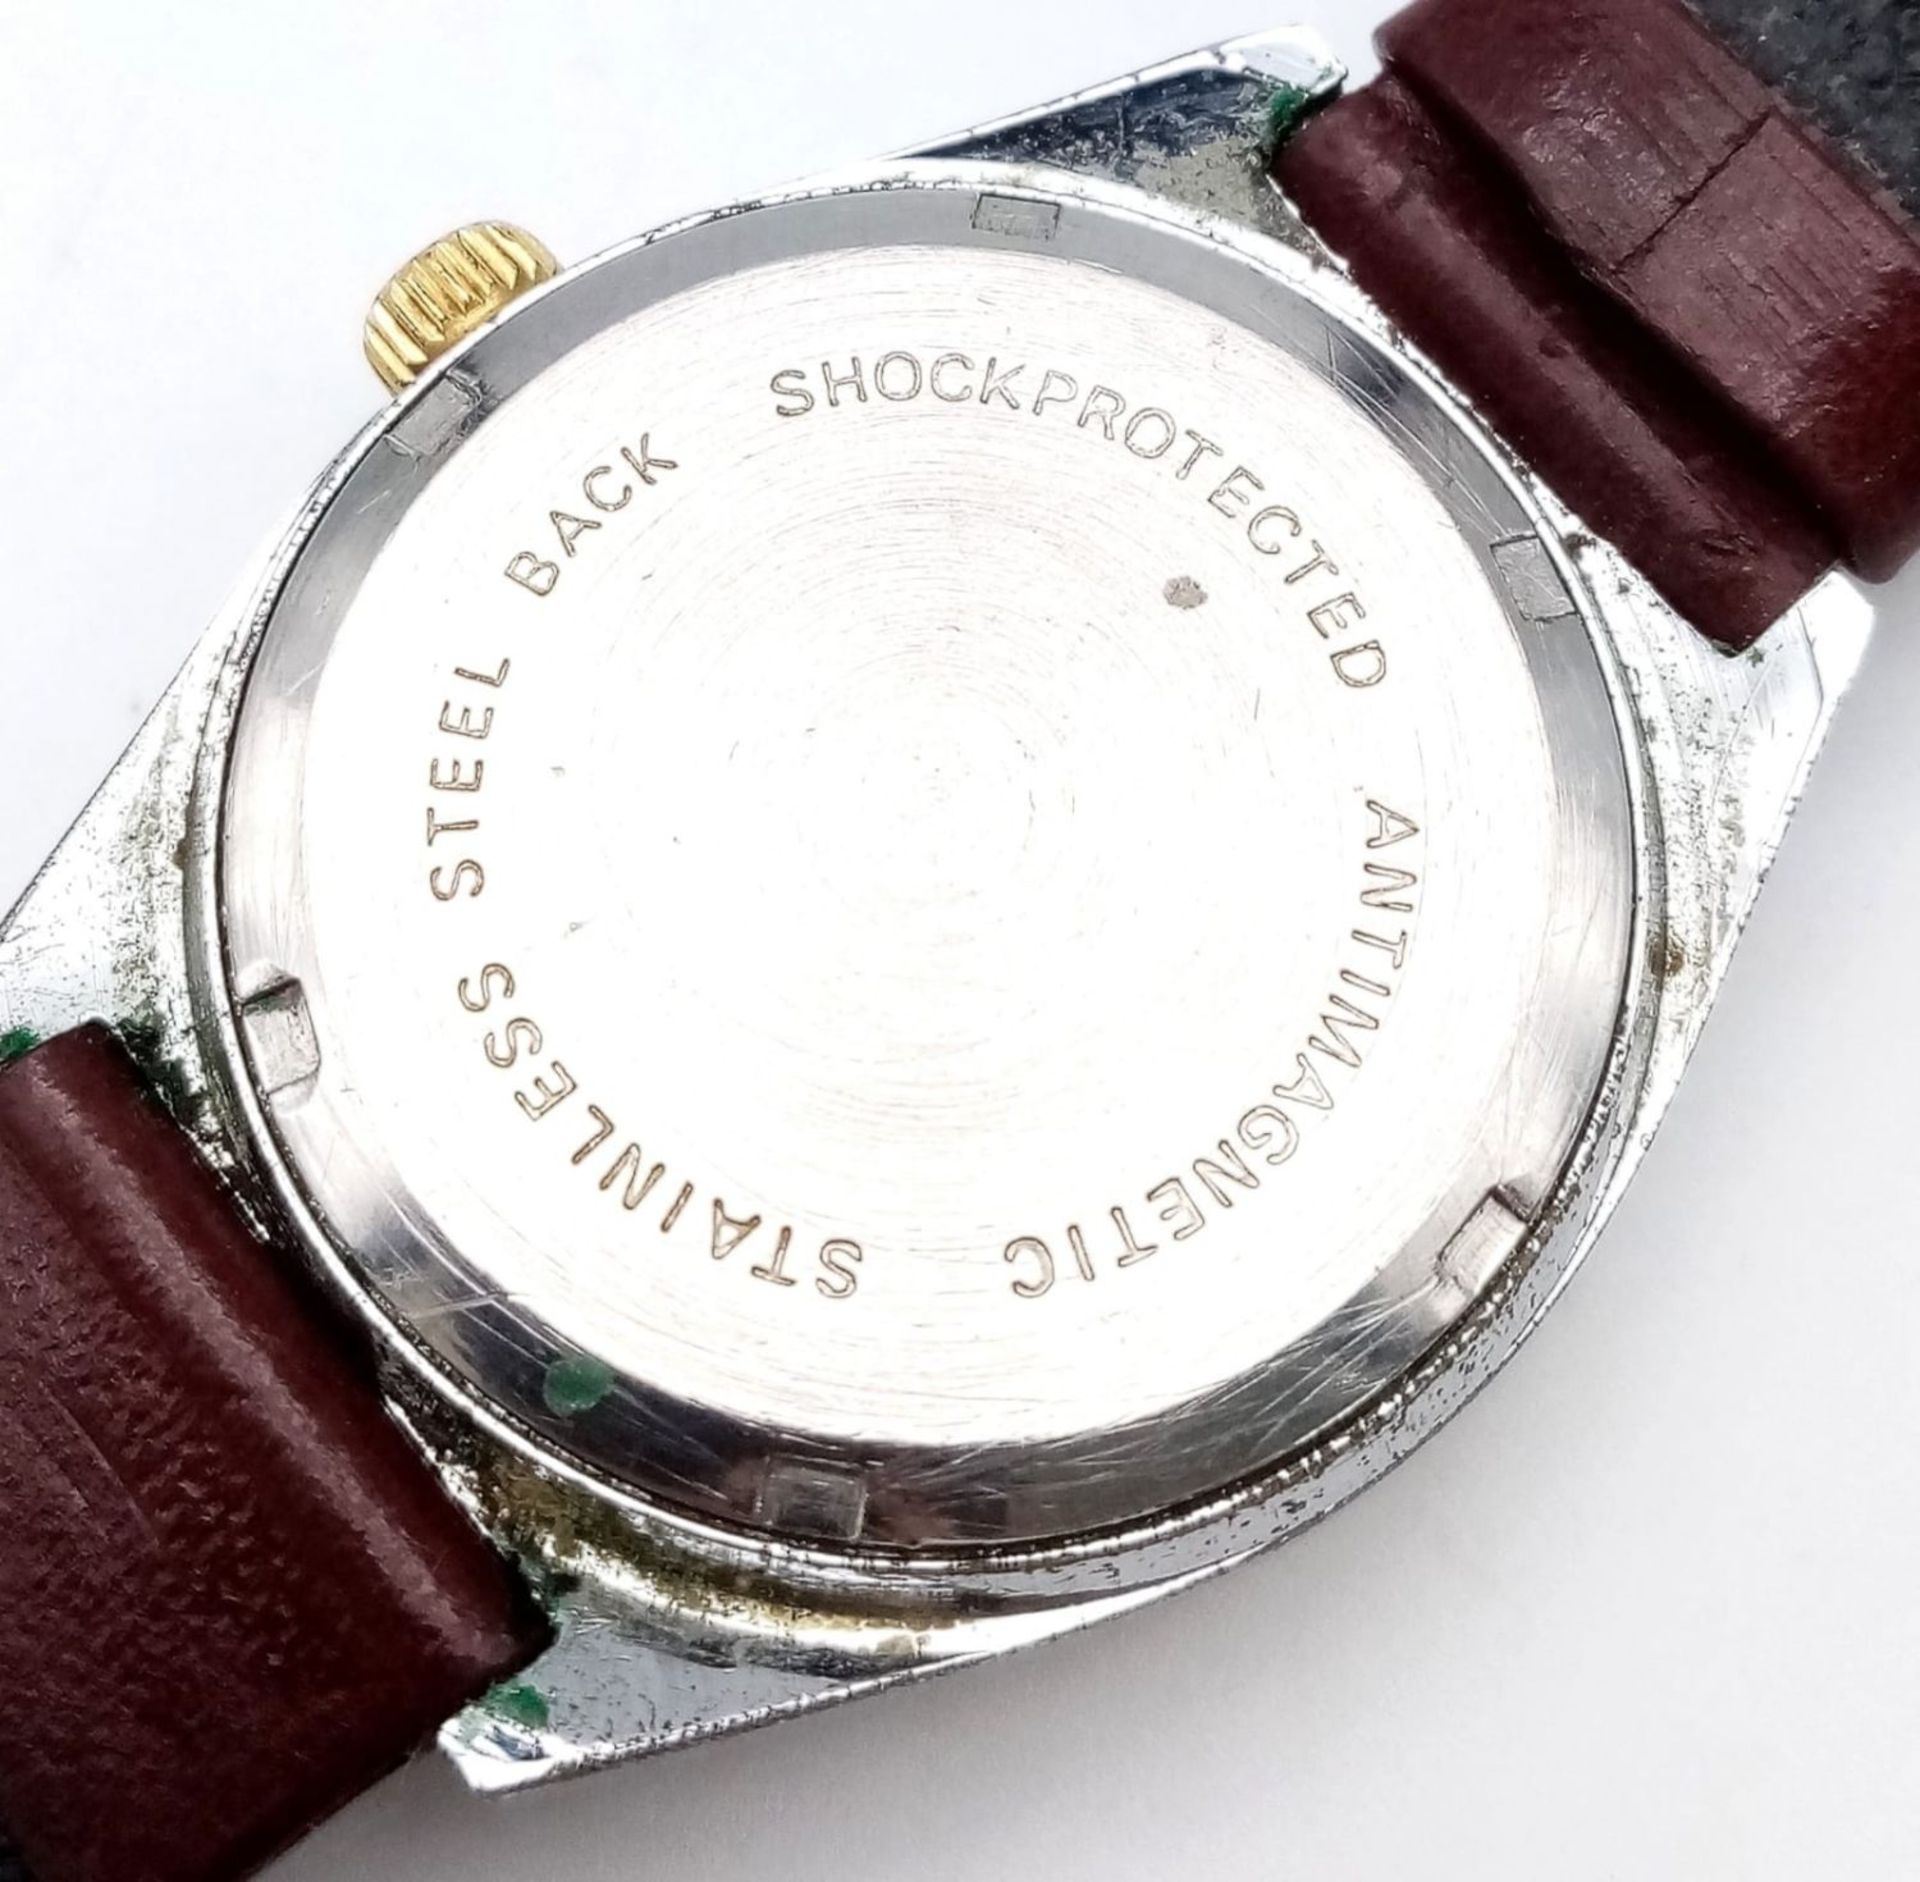 A Vintage Remex De Luxe Automatic Gents Watch. Burgundy leather strap. Stainless steel case - - Image 12 of 12